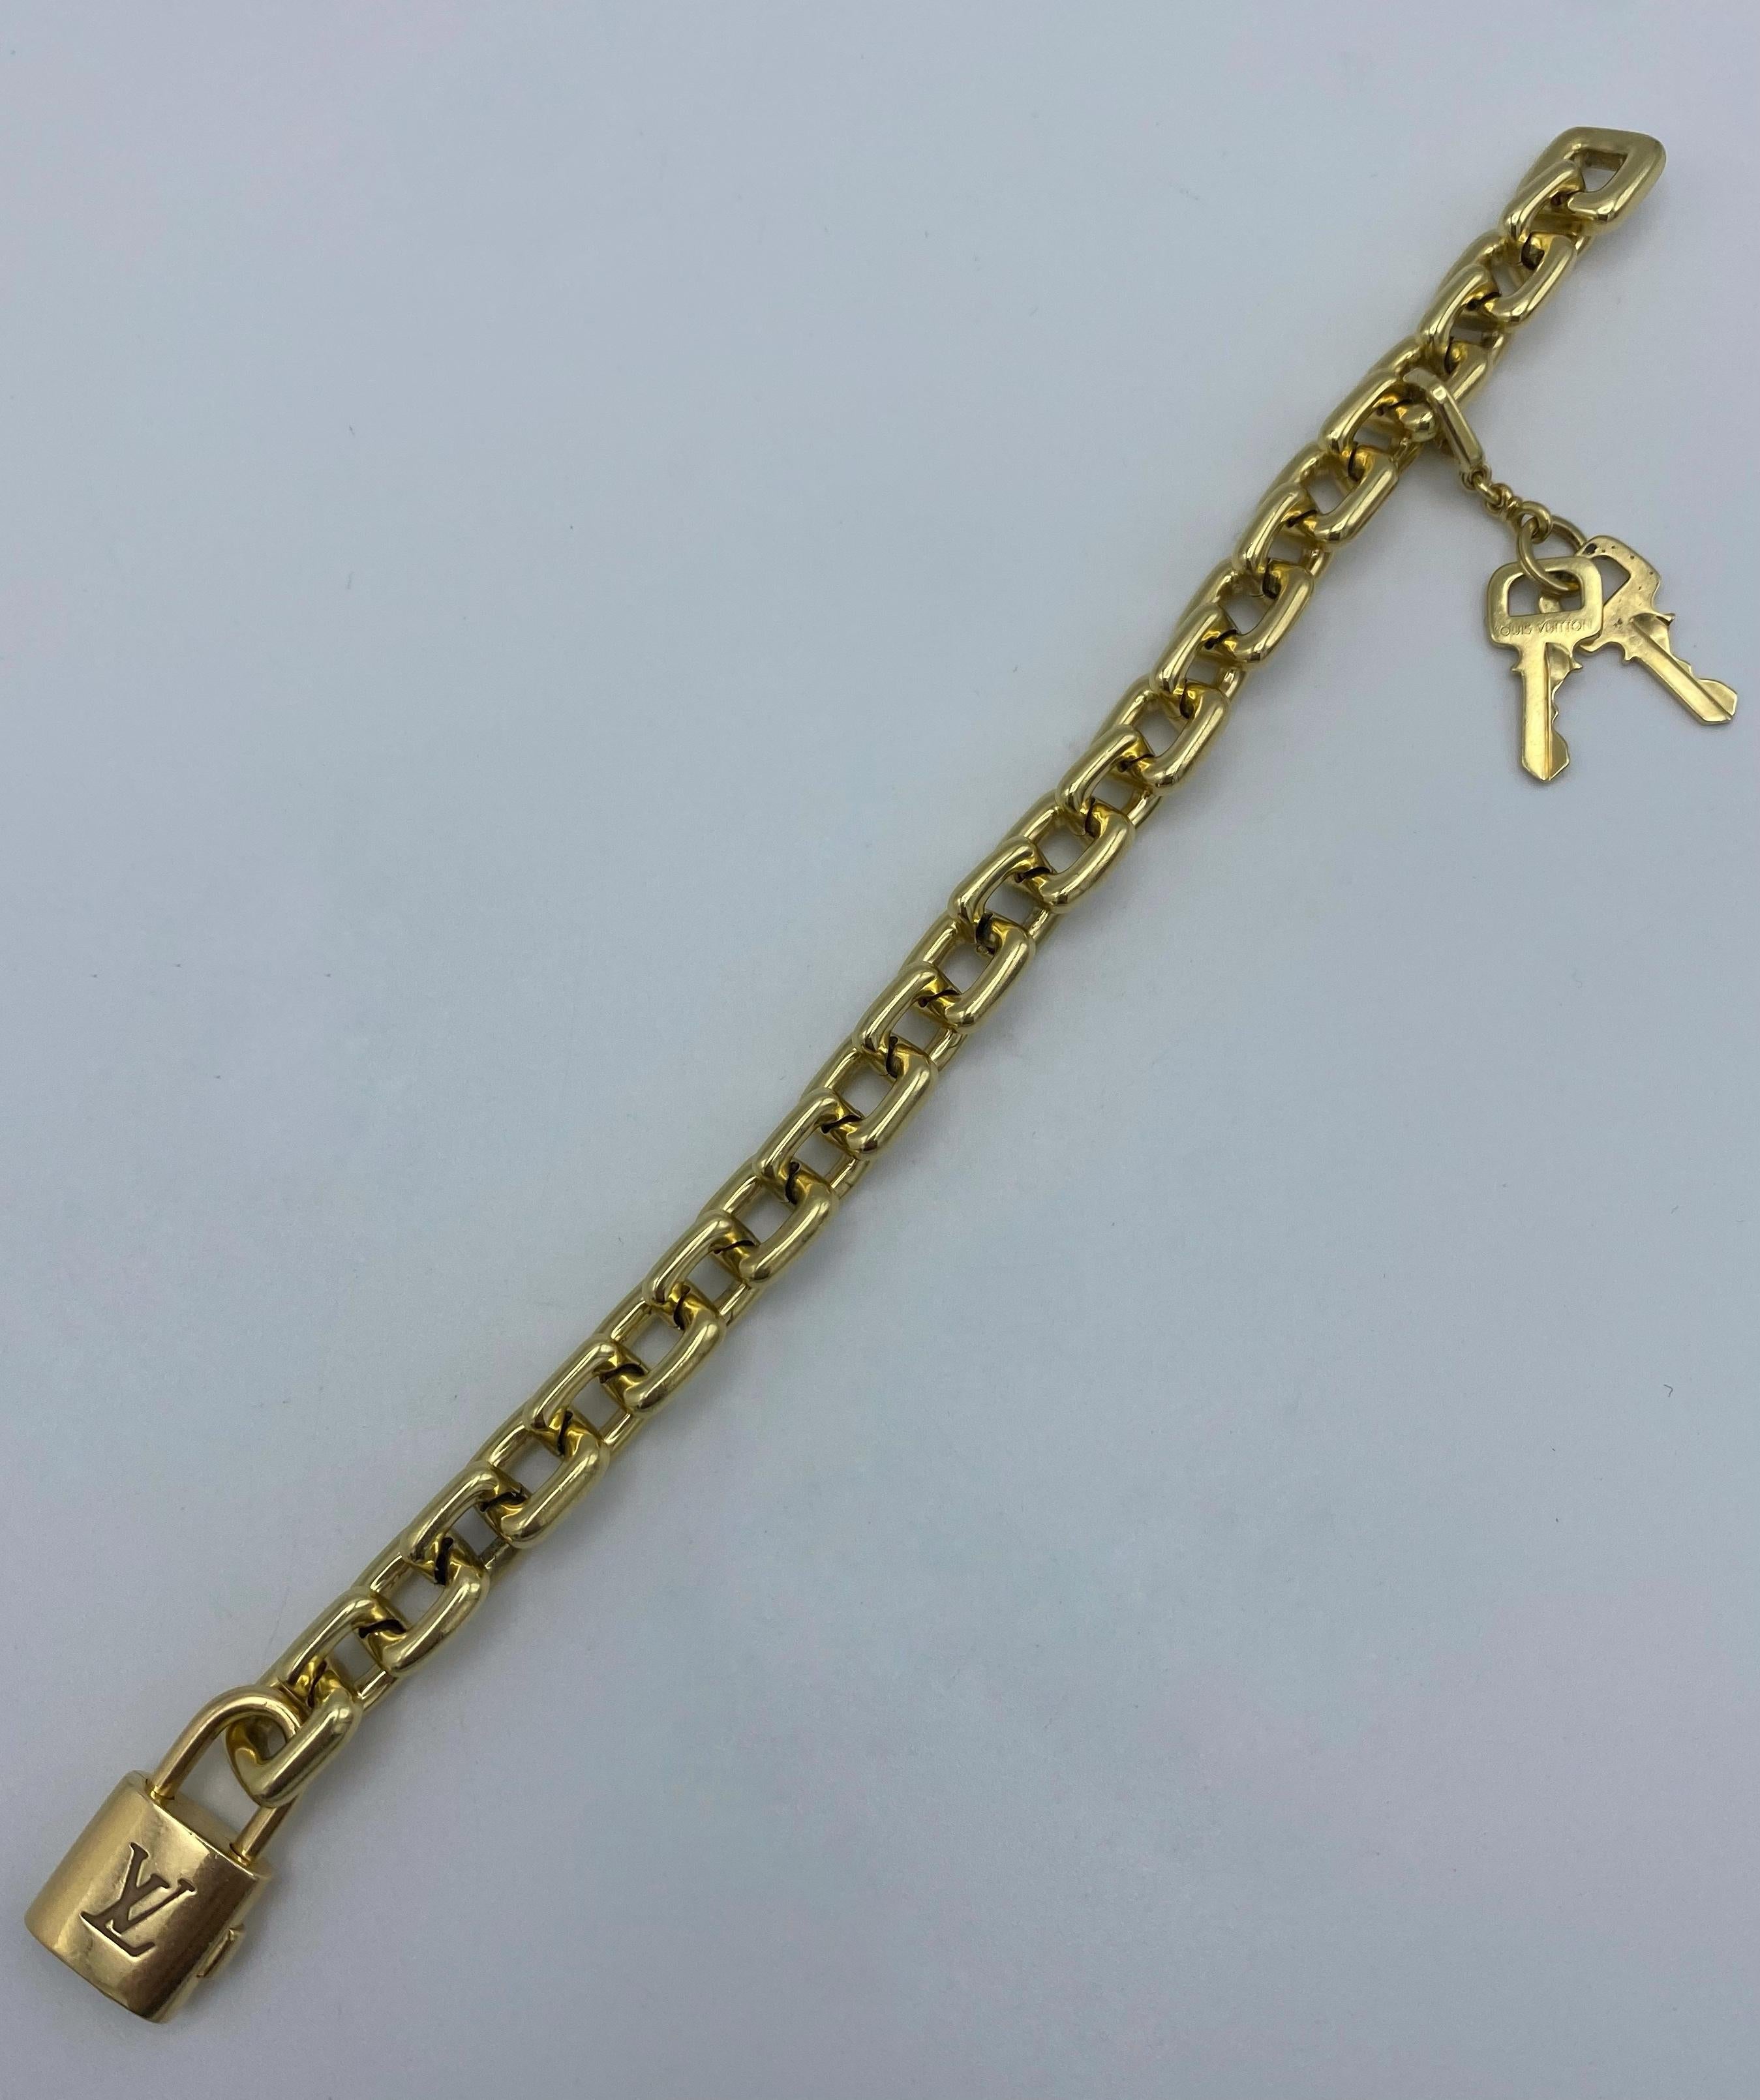 Product details:

The bracelet is made out of 18 karat yellow gold, featuring box link with lock and keys charms. The key charm is removable.

Measurements: the bracelet is 7- 1/2